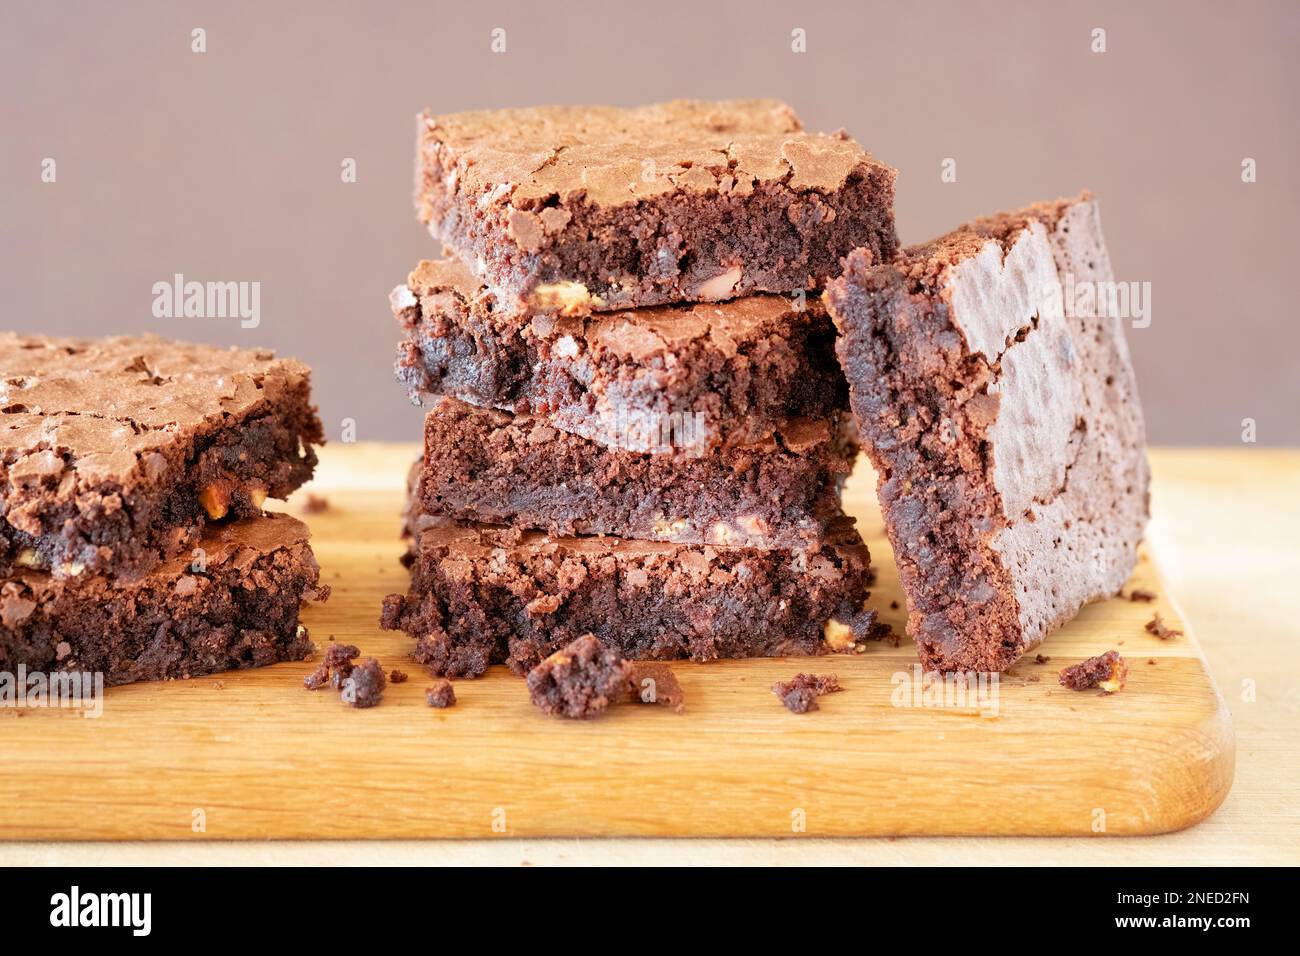 A batch of freshly home baked triple chocolate brownies arranged on a wooden serving board. The brownies are still warm and gooey. an indulgent treat Stock Photo